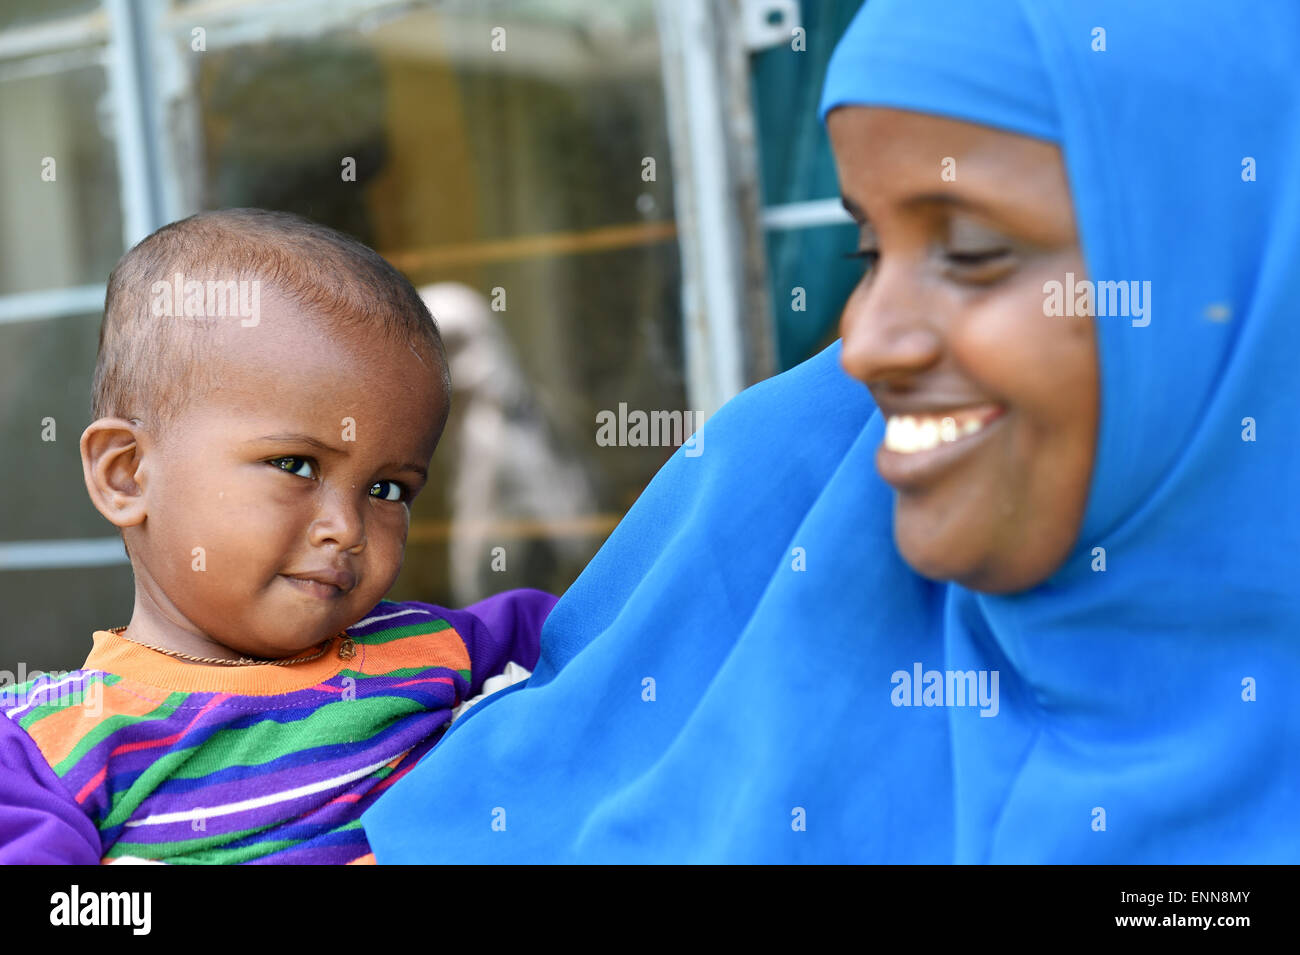 (150508) --DADAAB, May 8, 2015 (Xinhua) -- A refugee child smiles with his mother at Dadaab refugee camp, Kenya, May 8, 2015. Dadaab, the world's largest refugee camp in northeastern Kenya, currently houses some 350,000 people. For more than 20 years, it has been home to generations of Somalis who have fled their homeland wracked by conflicts. (Xinhua/Sun Ruibo) Stock Photo